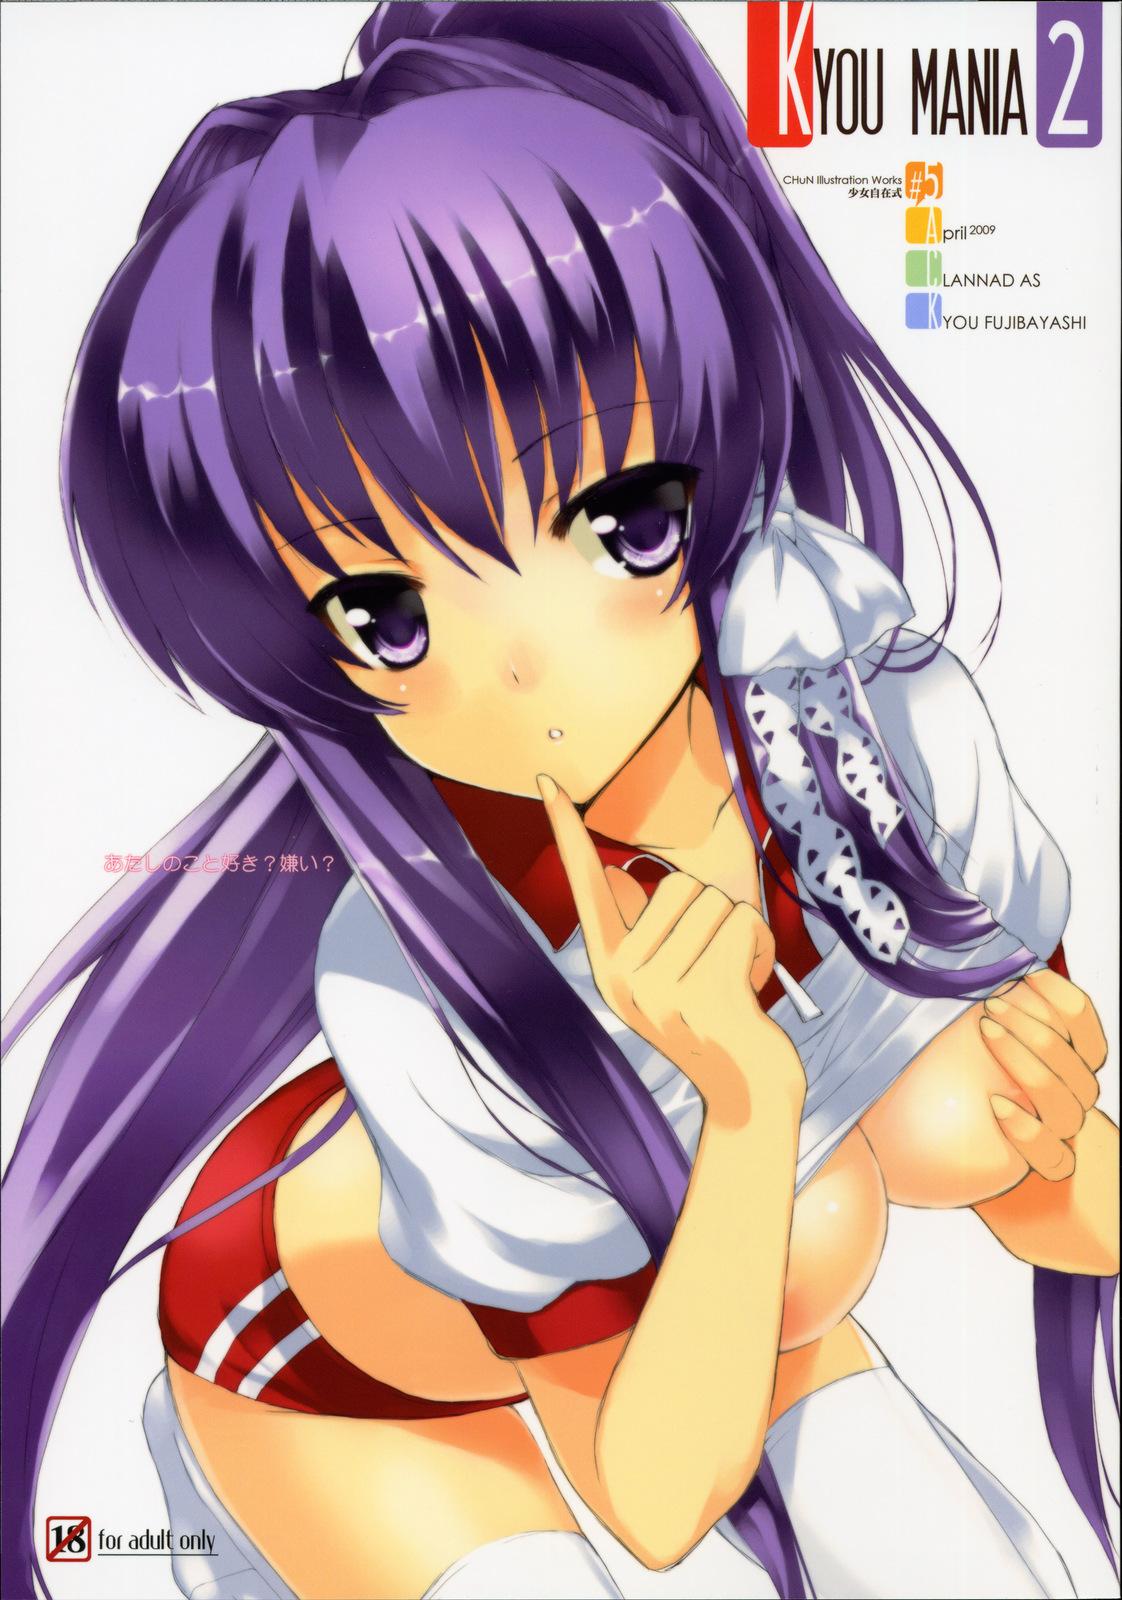 Ink KYOU MANIA 2 - Clannad Beach - Picture 1